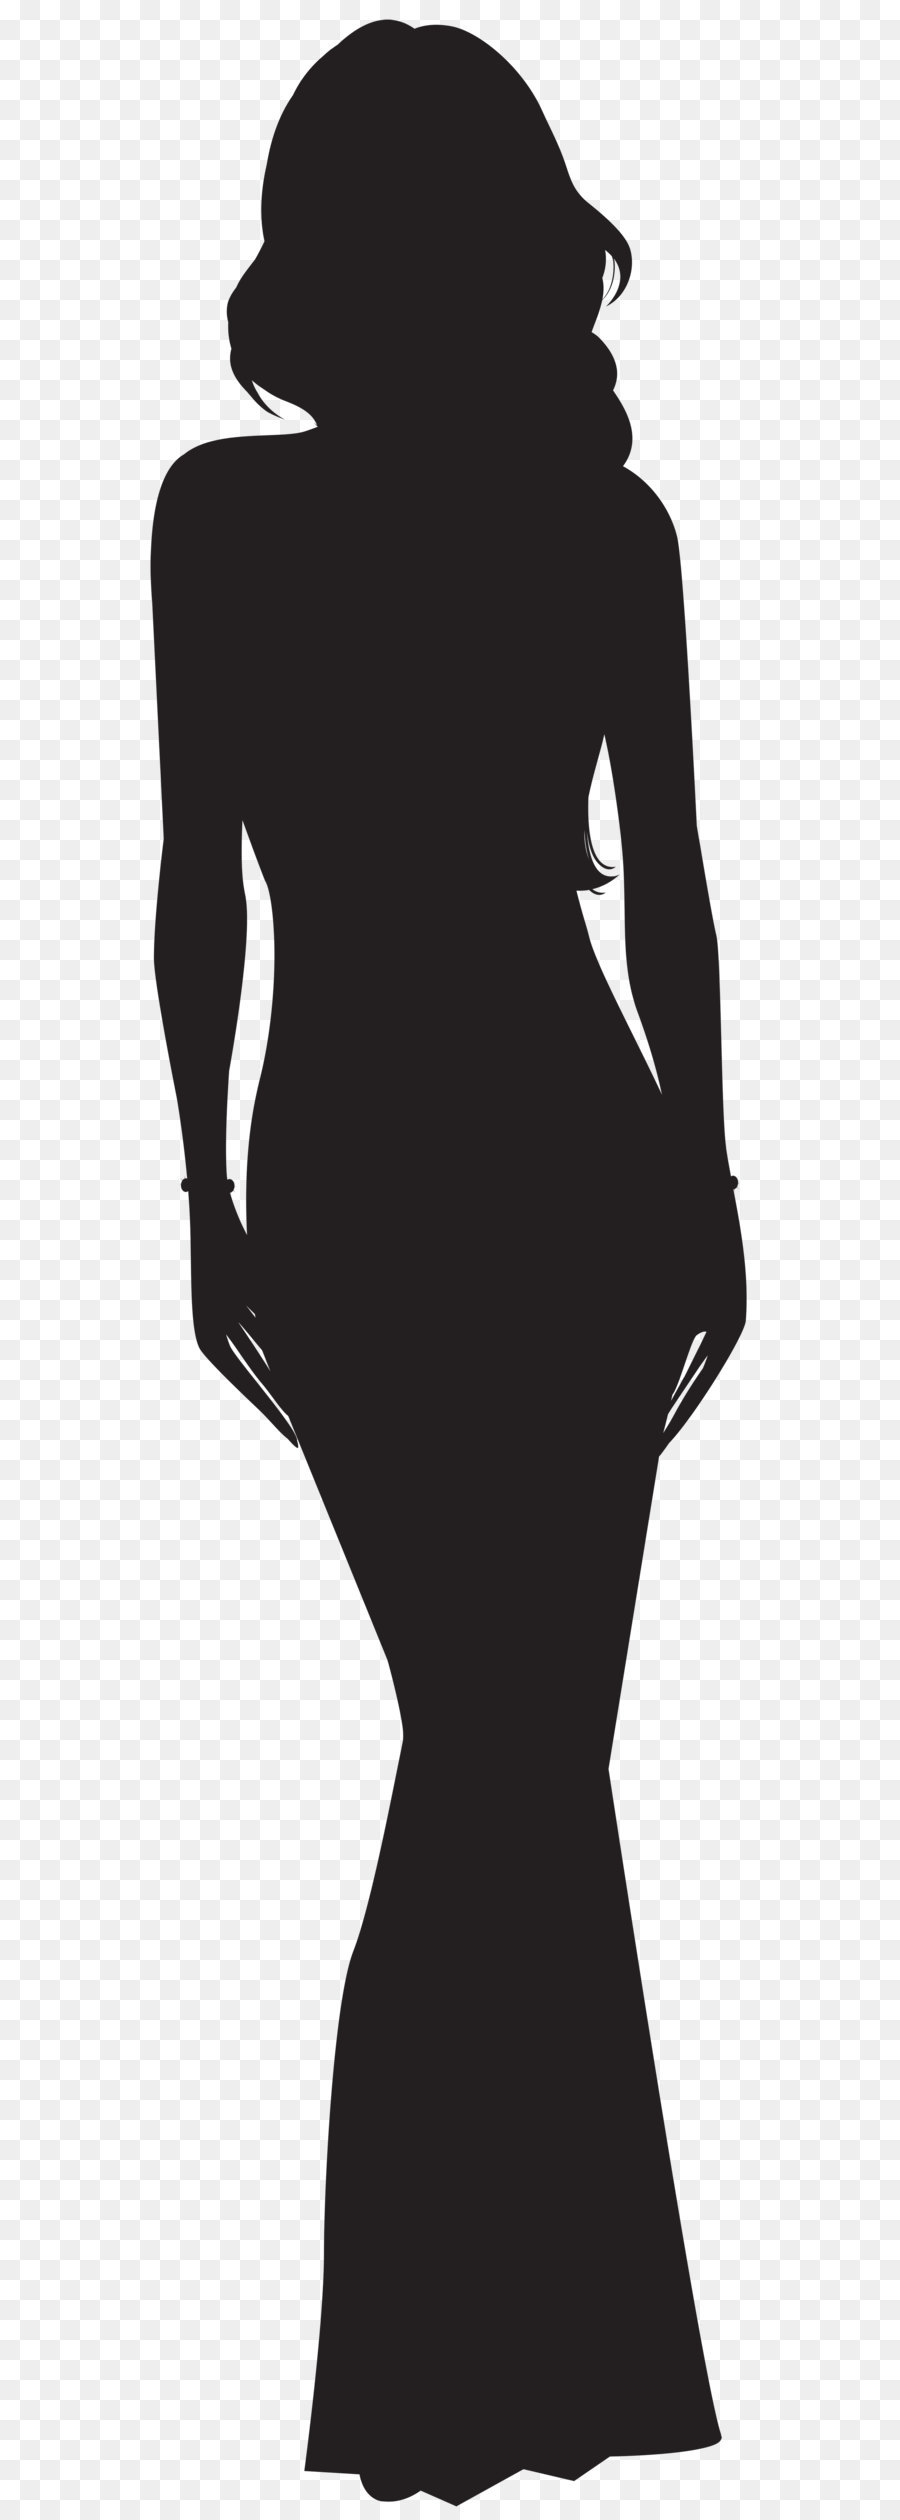 Silhouette Female Woman Clip art - Woman Silhouette PNG Clip Art Image png download - 2065*8000 - Free Transparent  png Download.